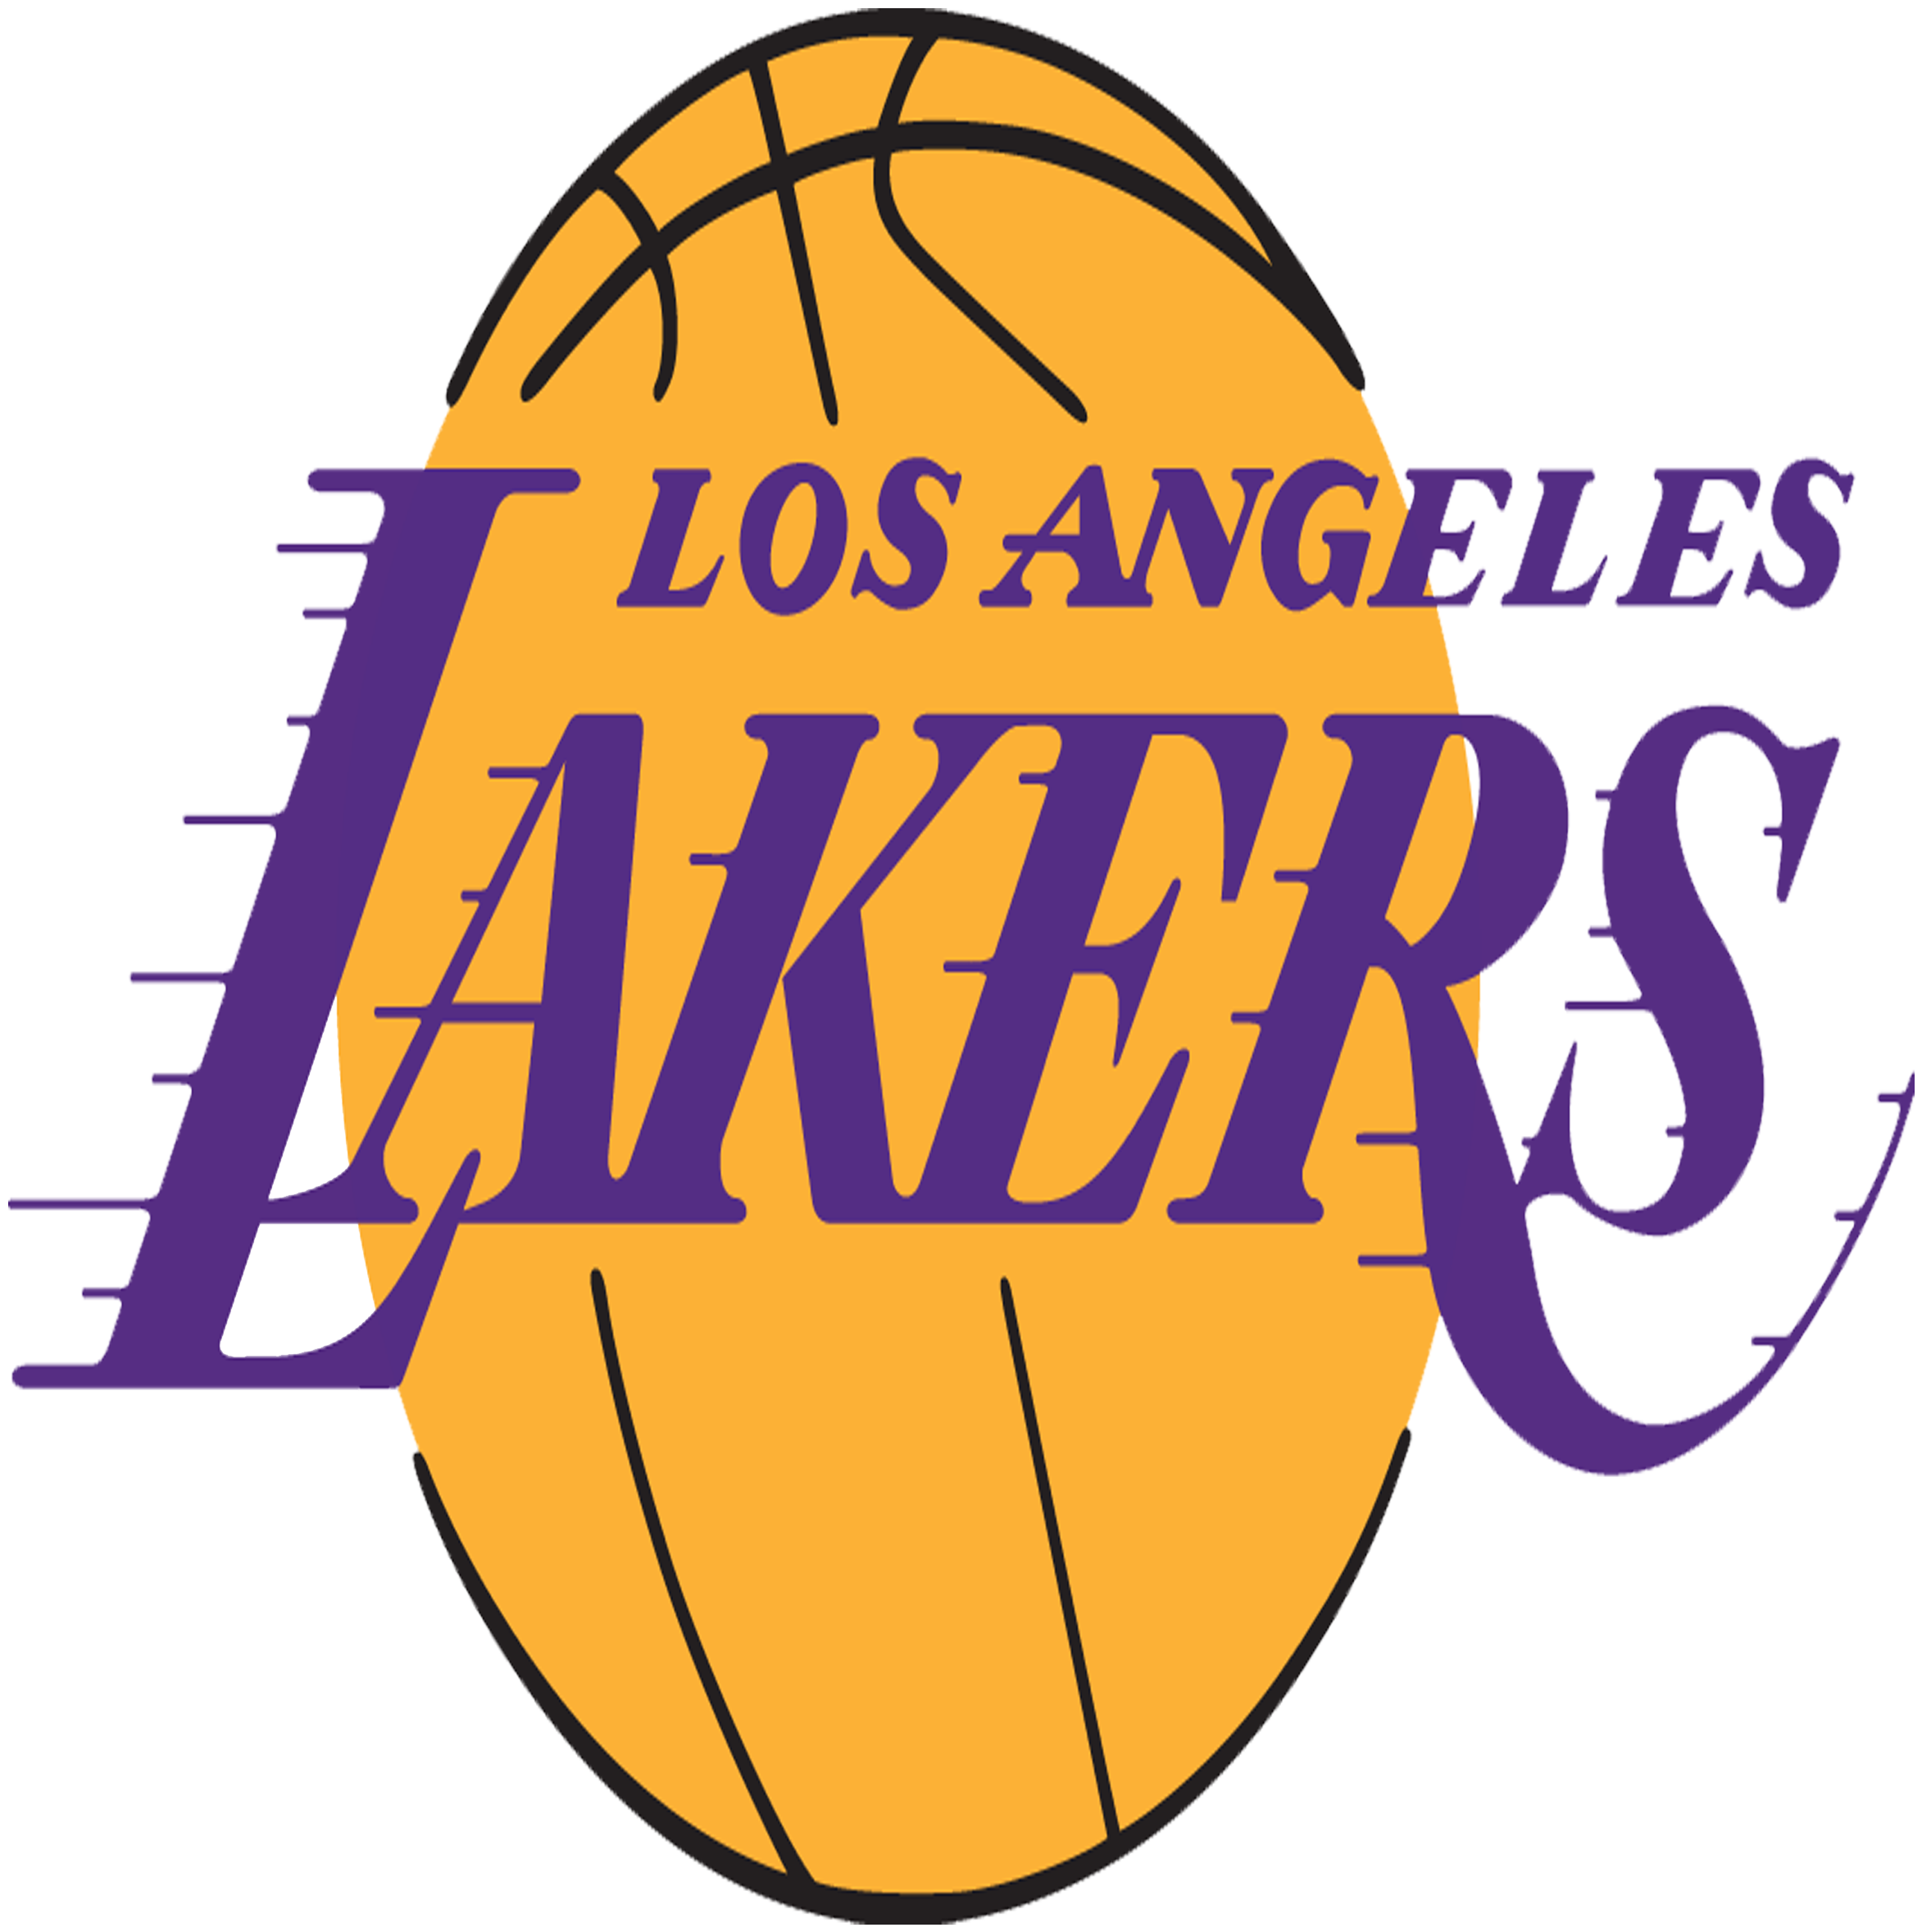 Los Angeles Lakers Logo PNG Pic